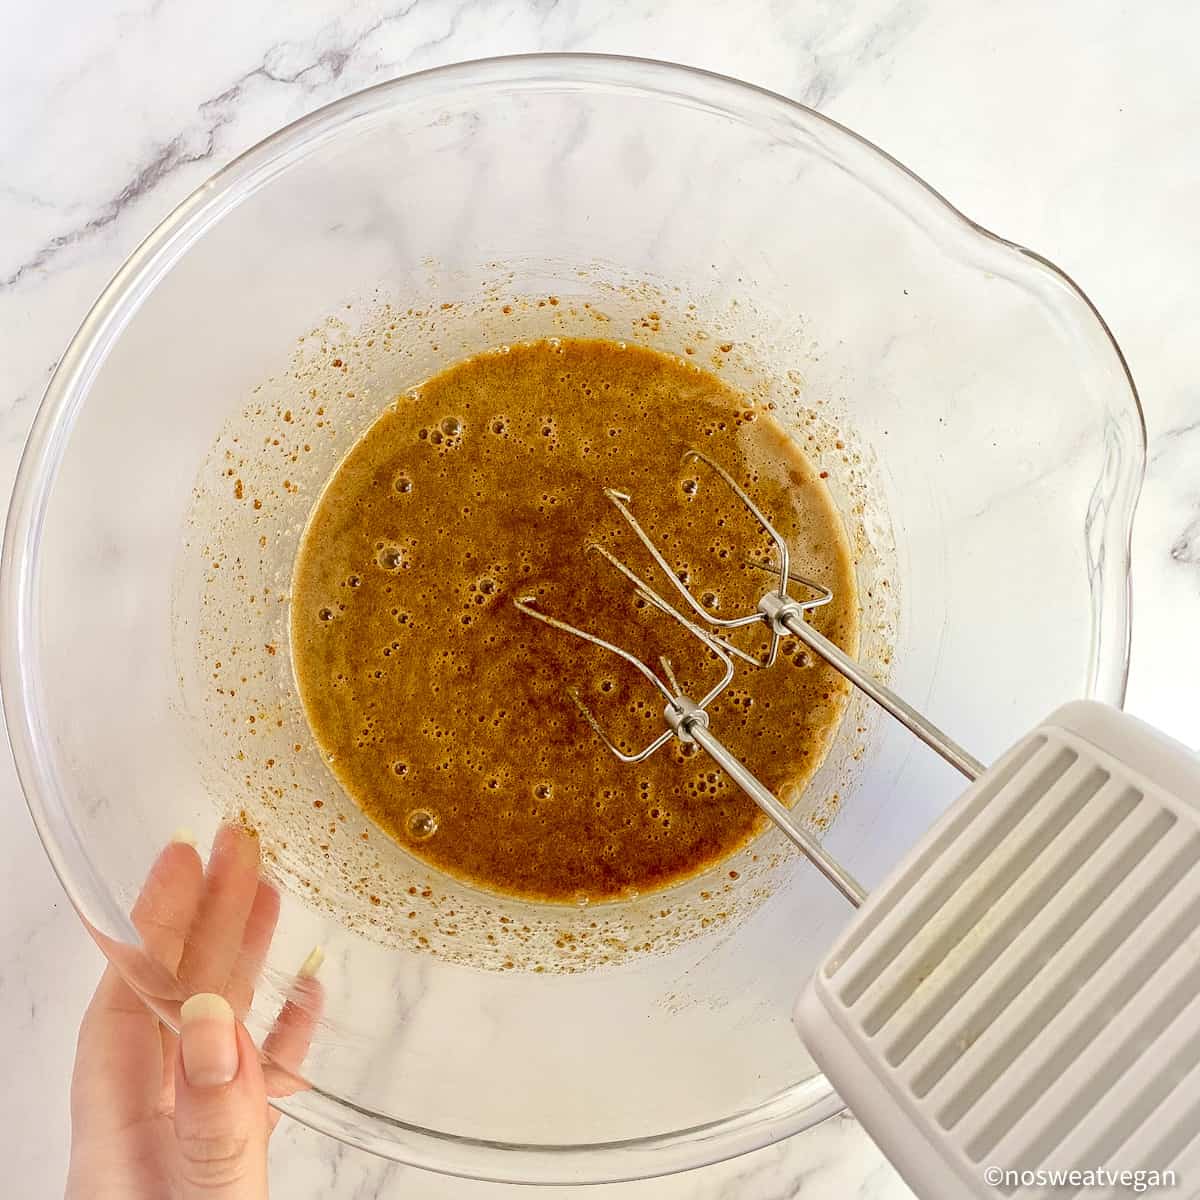 Mix the wet ingredients with a hand mixer.